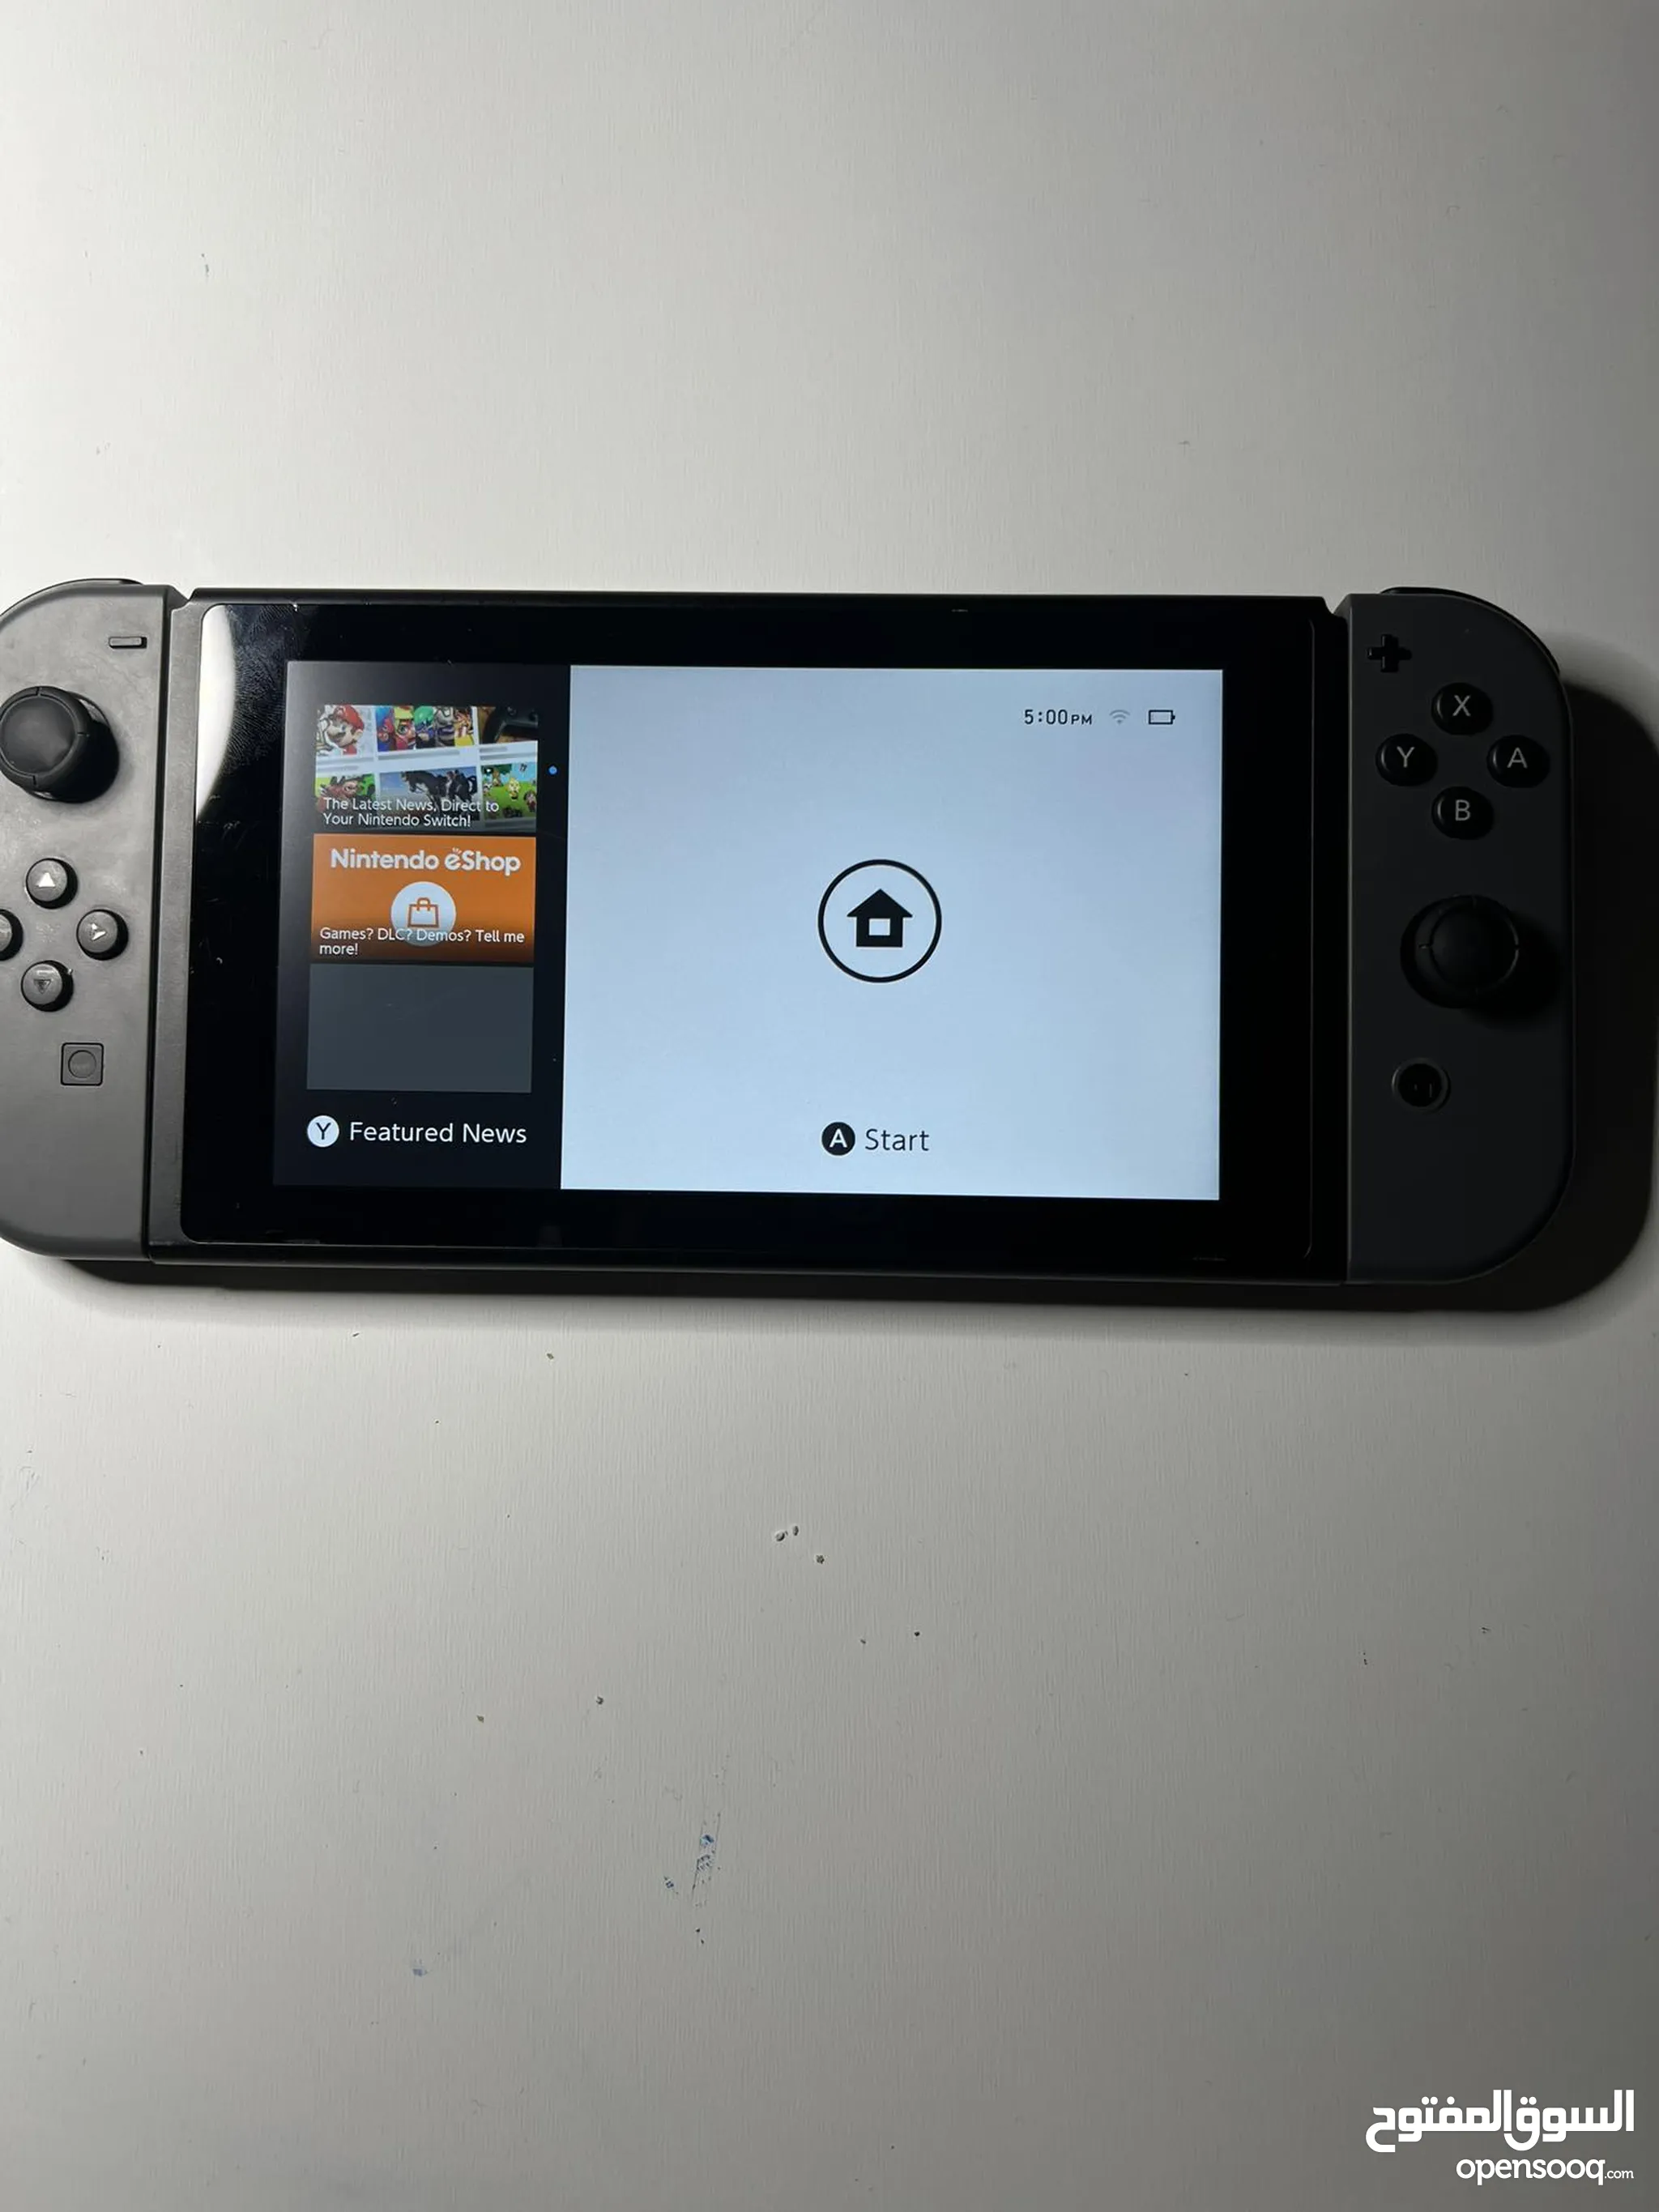 Nintendo Switch For Sale in Jordan : Used : Best Prices | OpenSooq